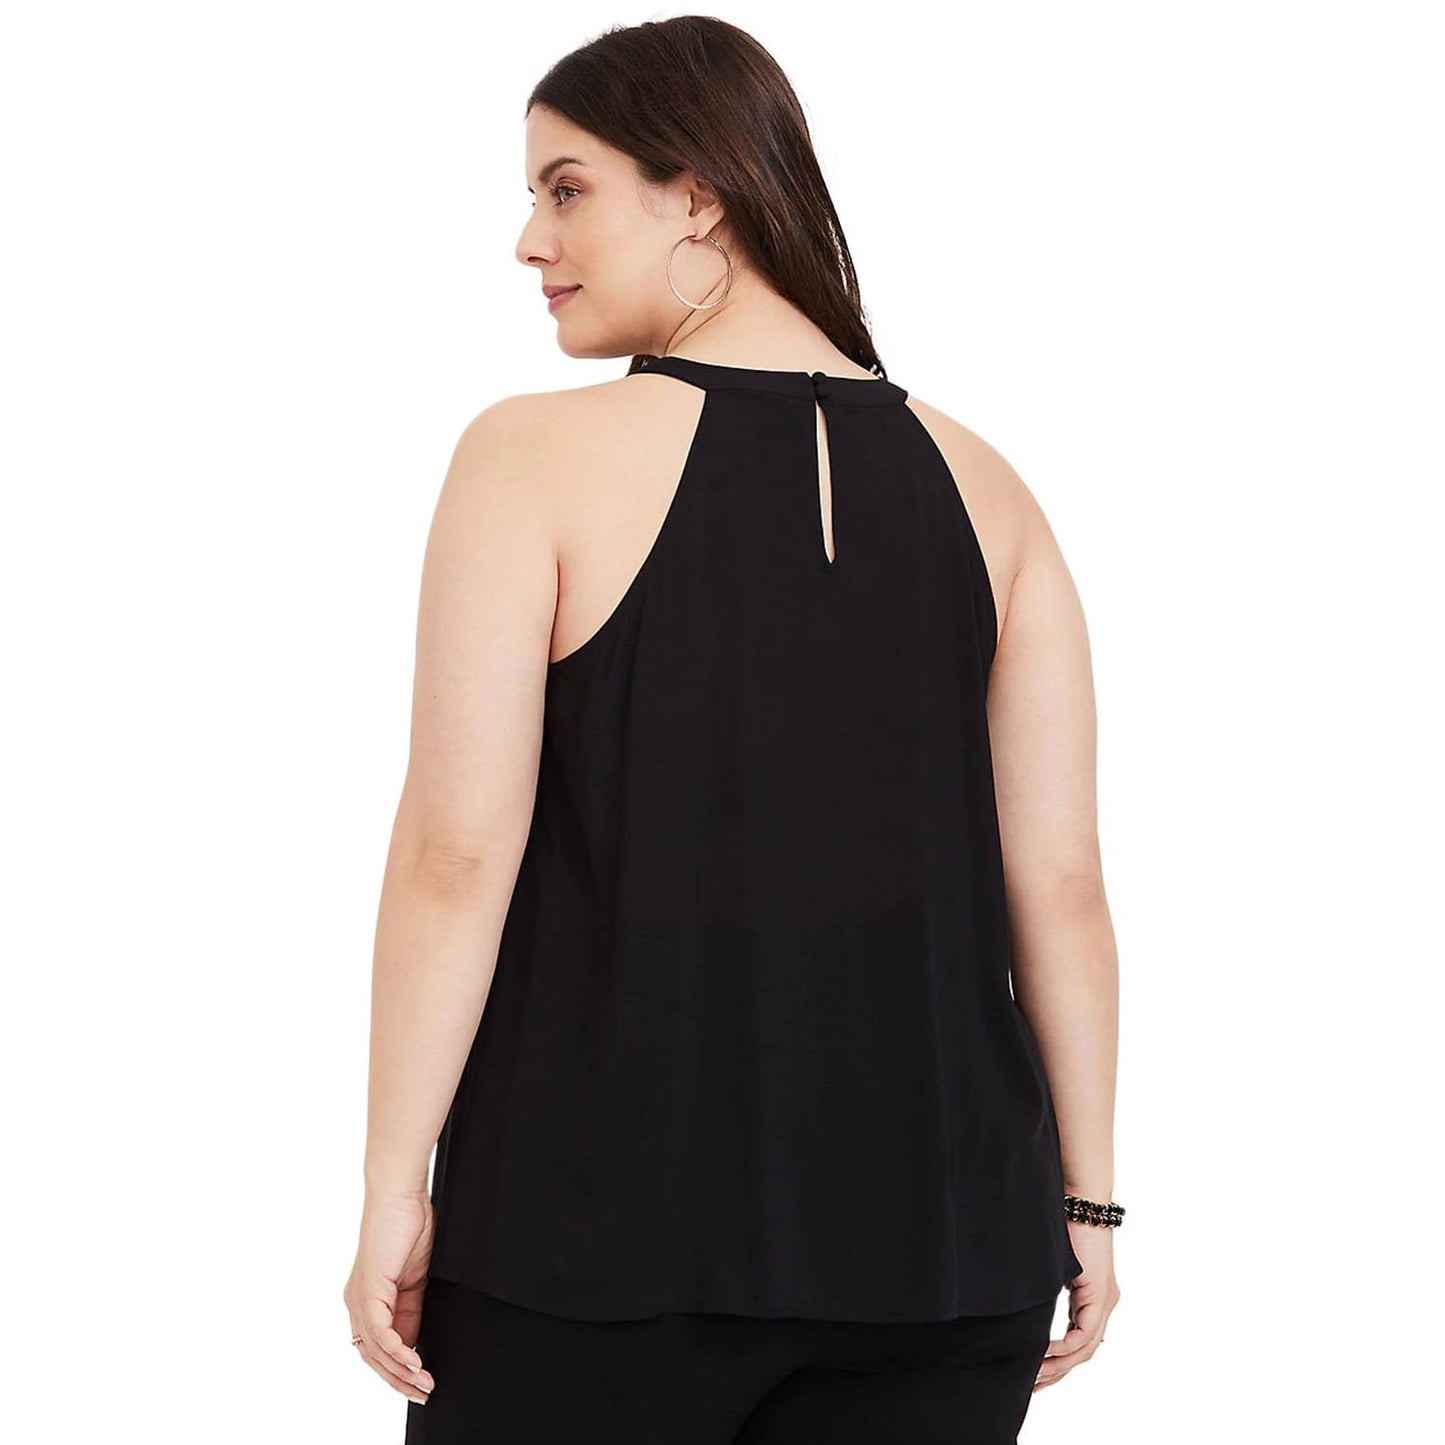 Plus Size Goddess Top - Black - Best YOU by HTS